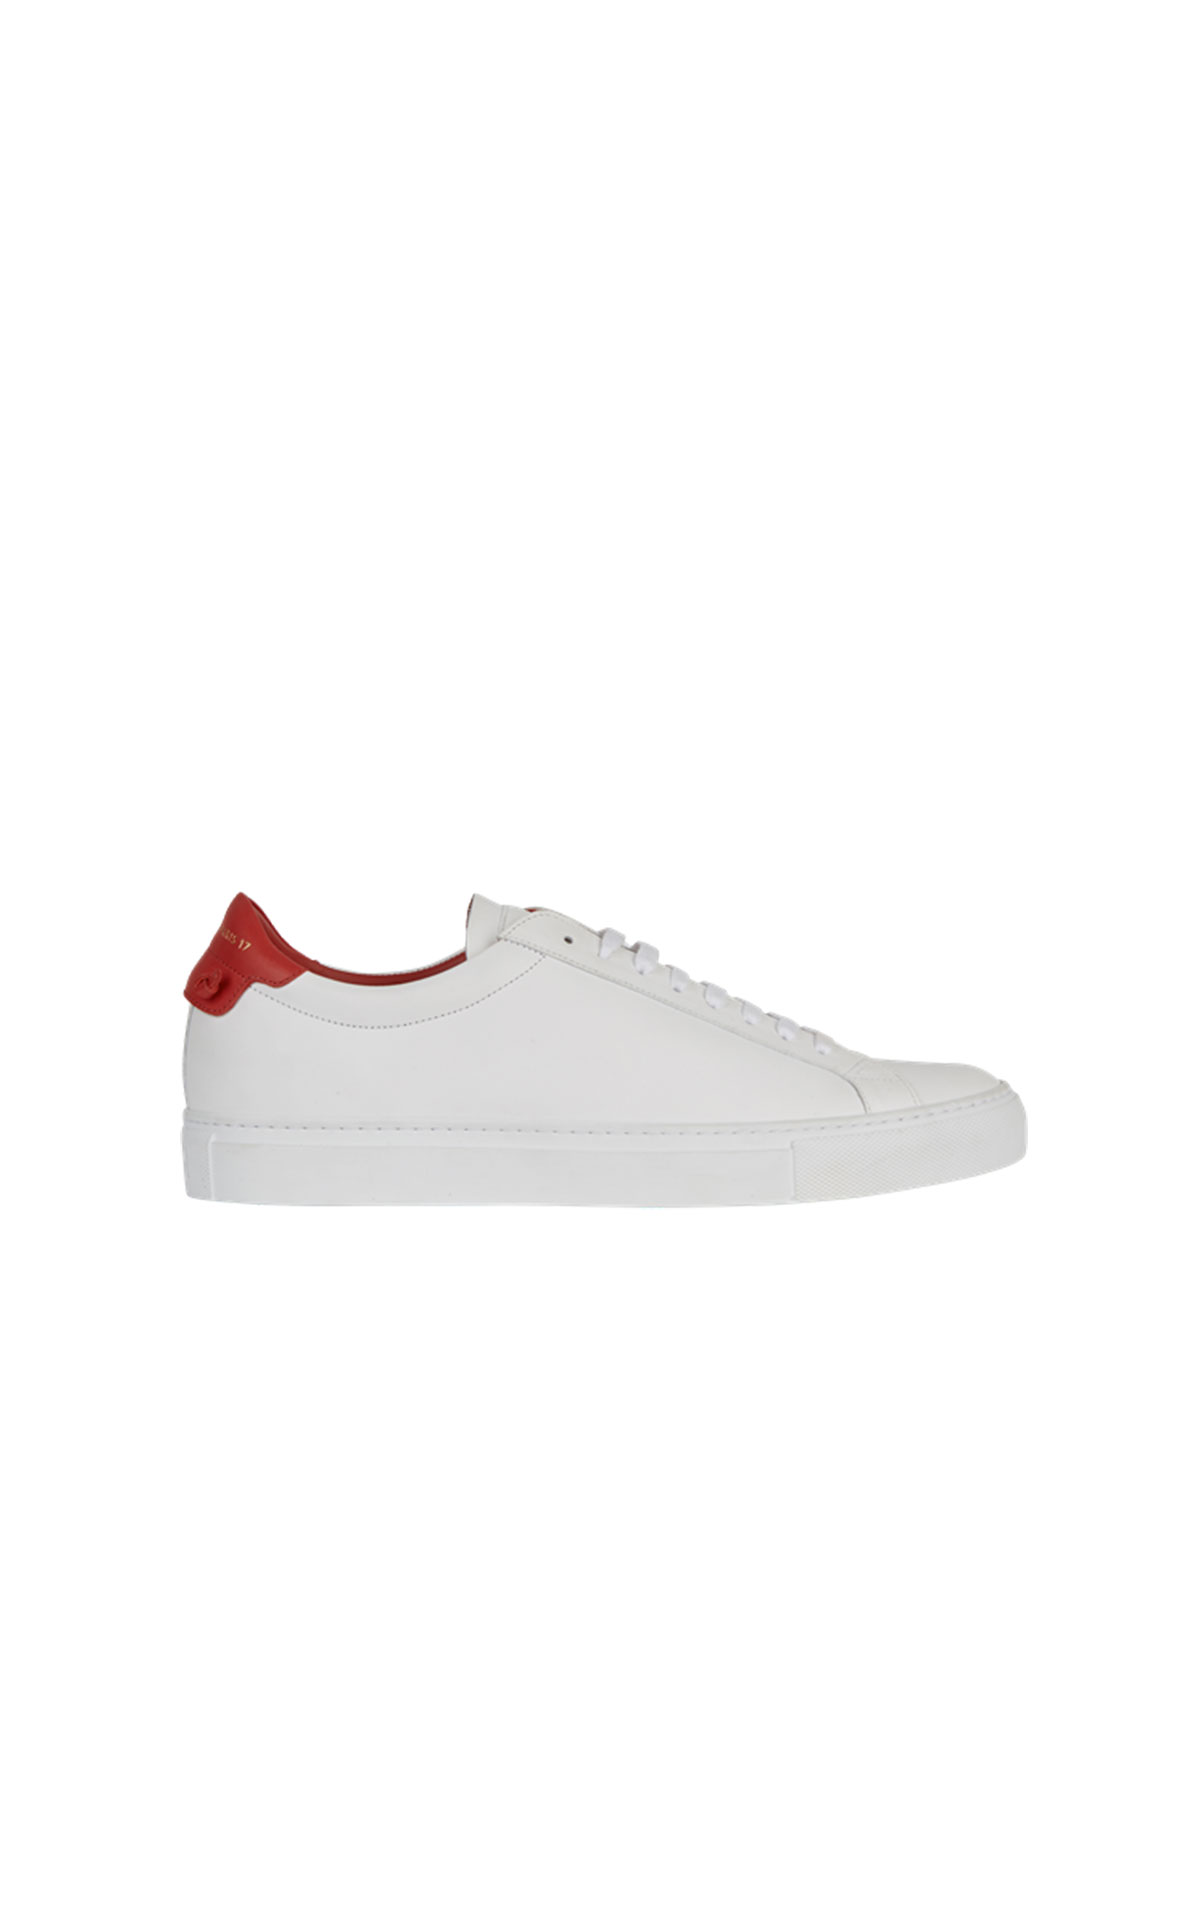 Givenchy Low sneaker from Bicester Village